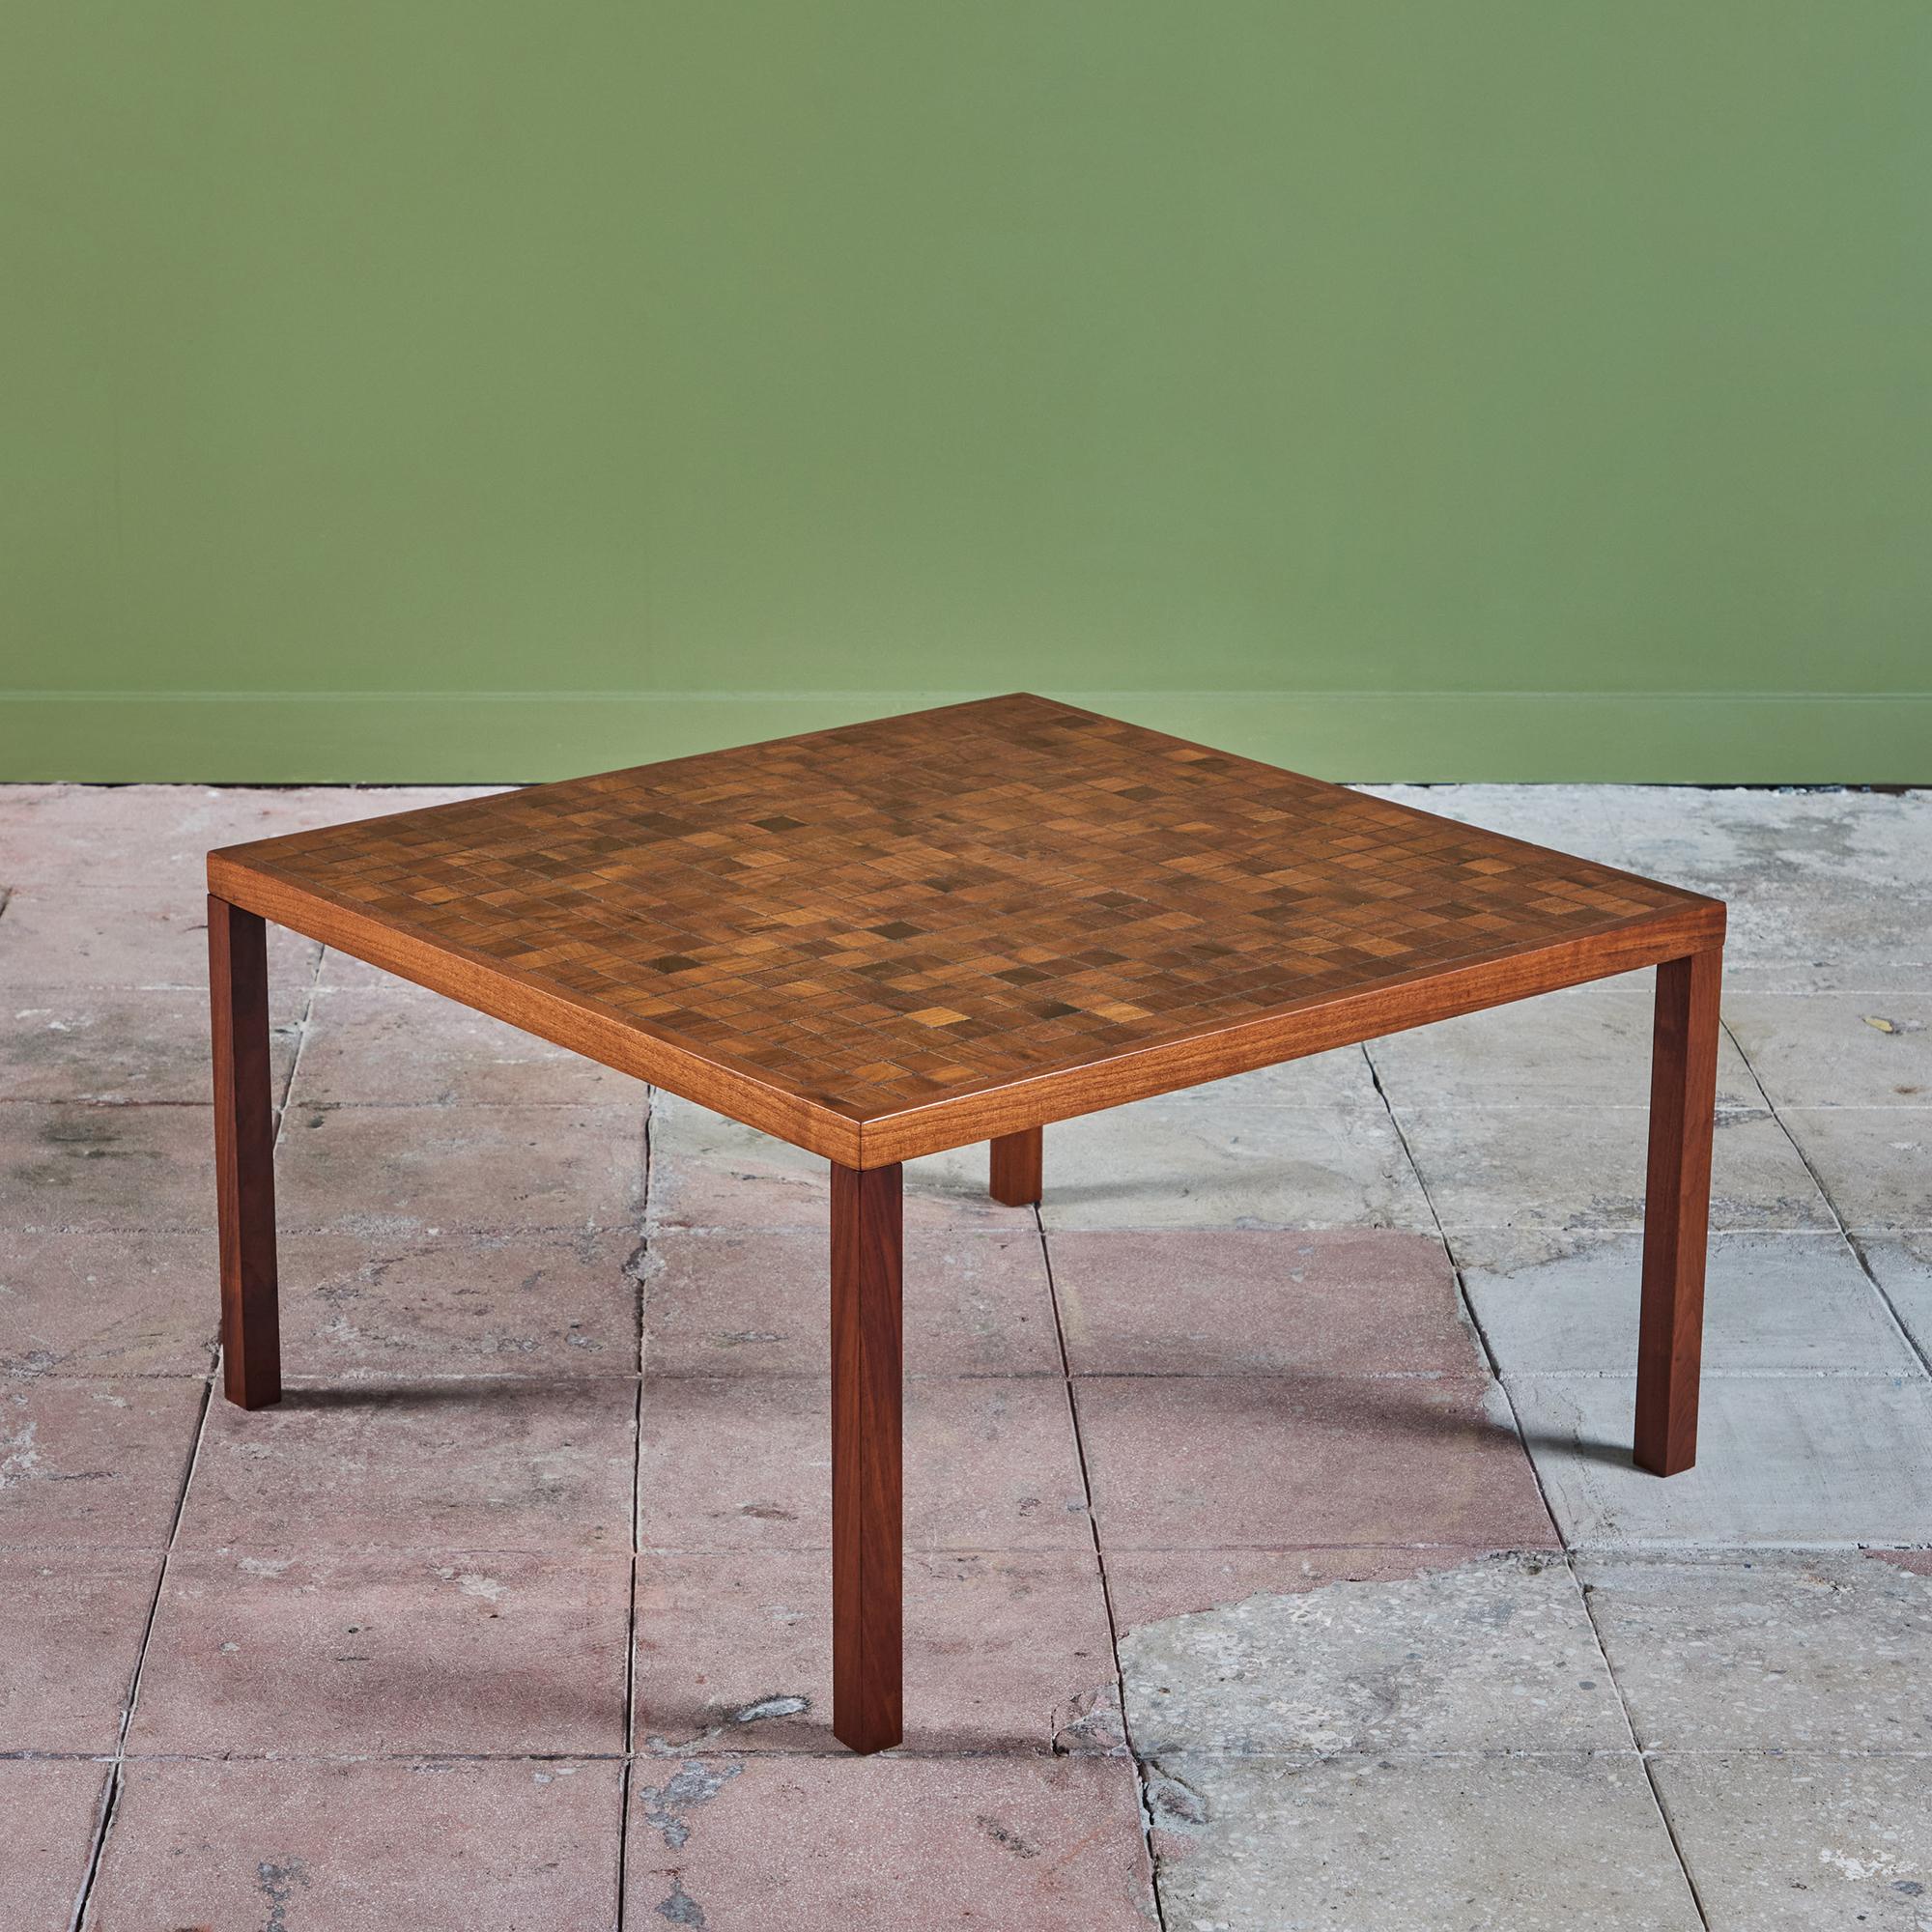 Square walnut coffee table by Gordon & Jane Martz. The table top is inlaid with square tiles in a geometric pattern. The tiles feature varying wood grains and brown tones. The frame, and table legs are solid walnut.

Dimensions
﻿29